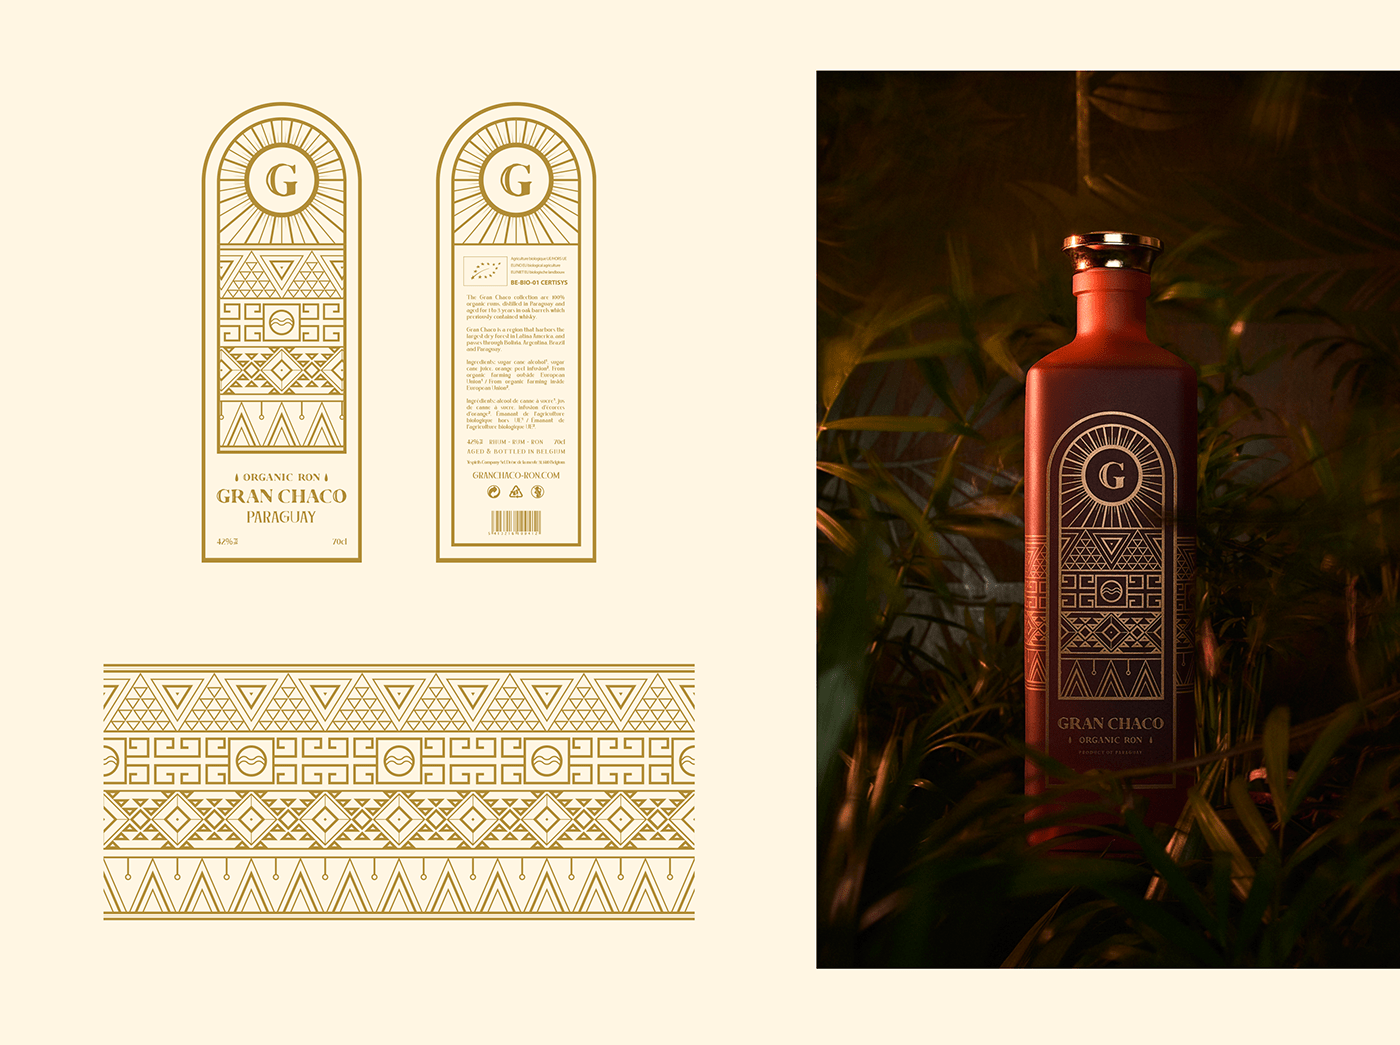 Packaging design for Gran Chaco